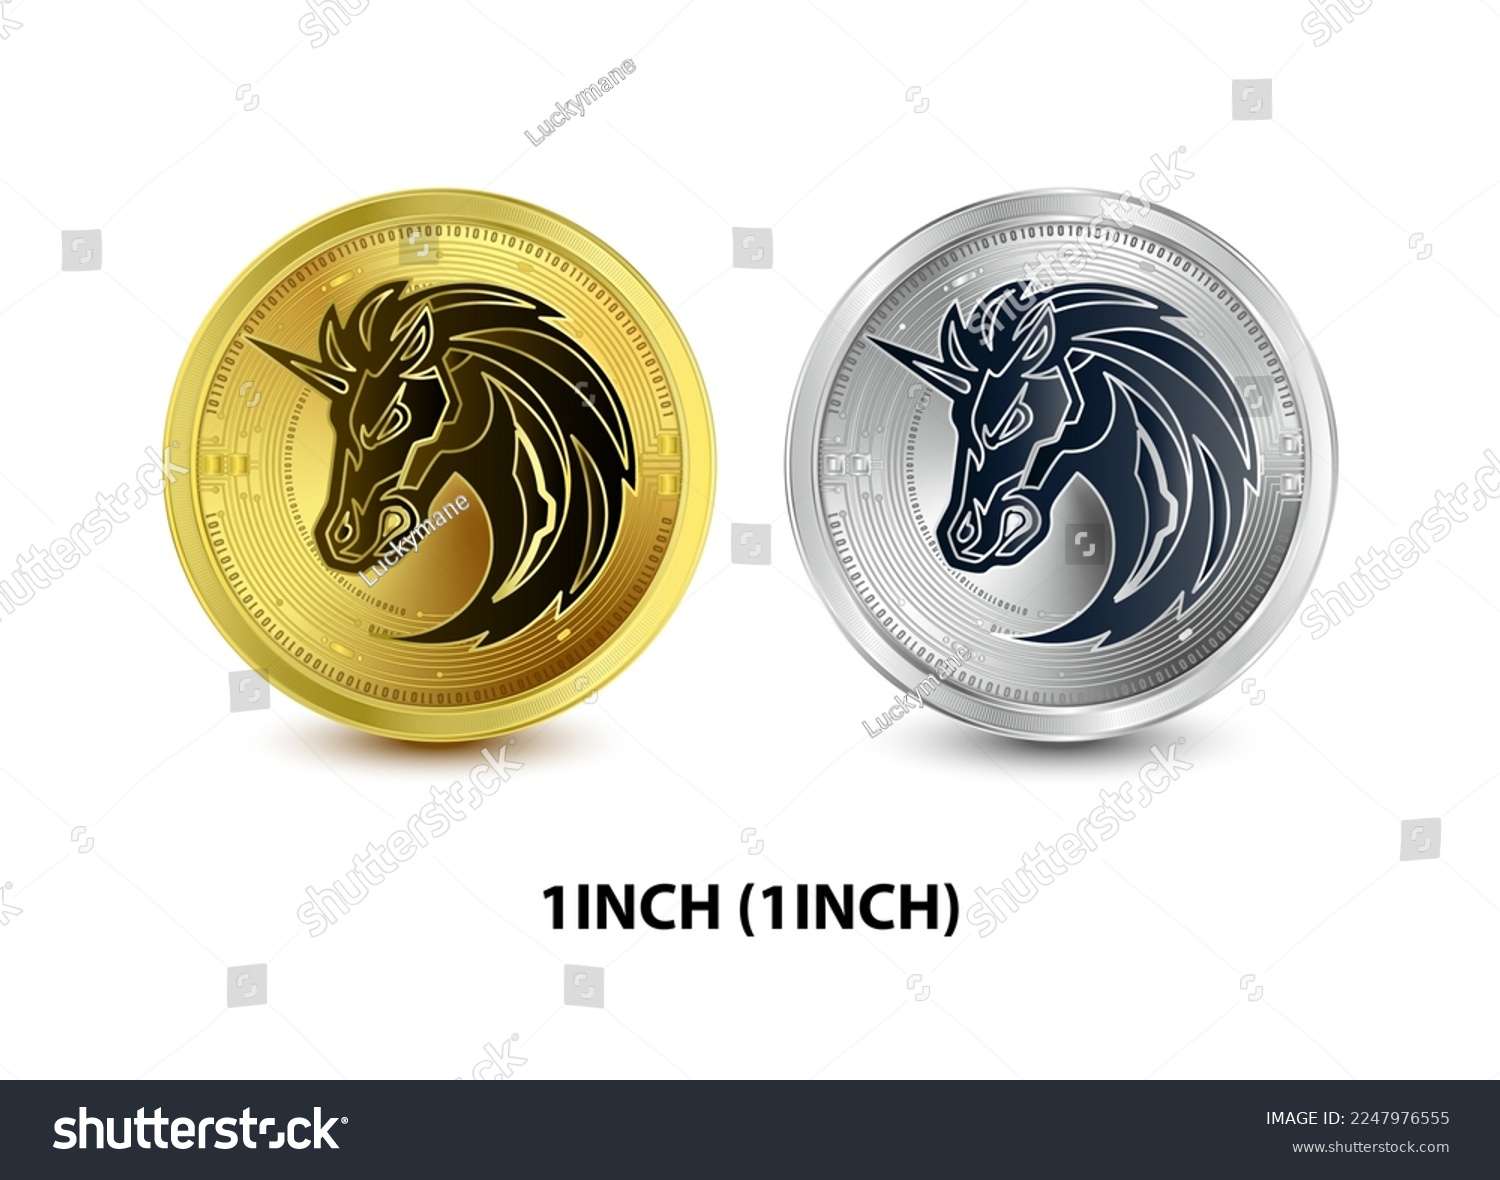 SVG of Set of Gold and Silver coin 1inch (1INCH) 3D Vector illustration. Digital currency. Cryptocurrency Golden coins symbol isolated on white background. isometric Physical coins.  Digital money concept. svg